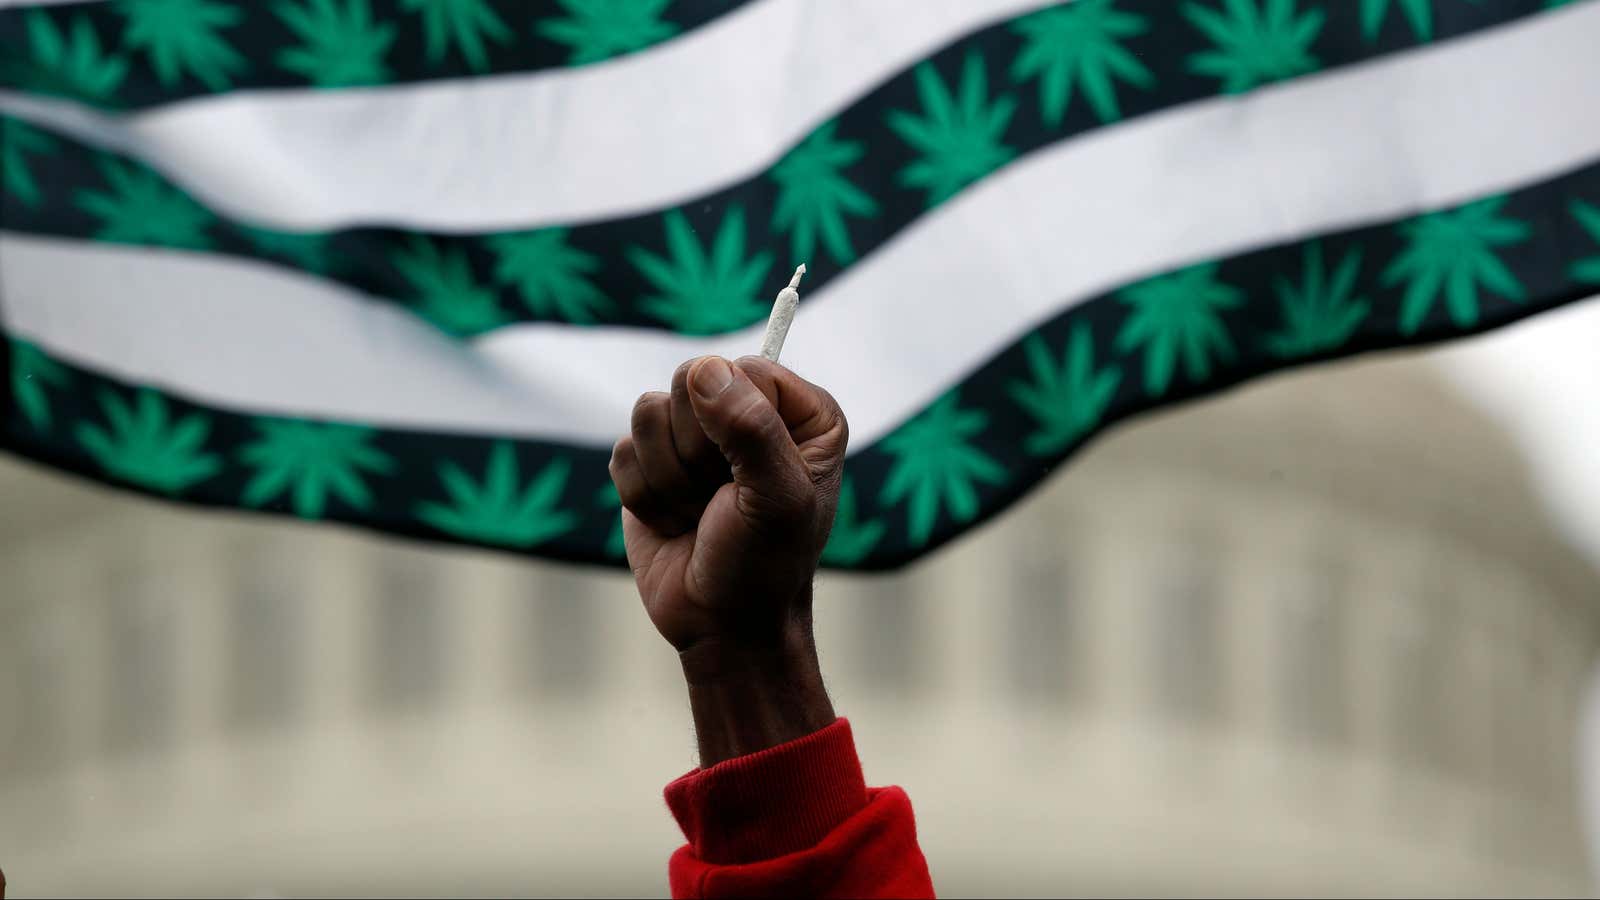 In the age of luxury cannabis, it’s time to talk about Drug War reparations